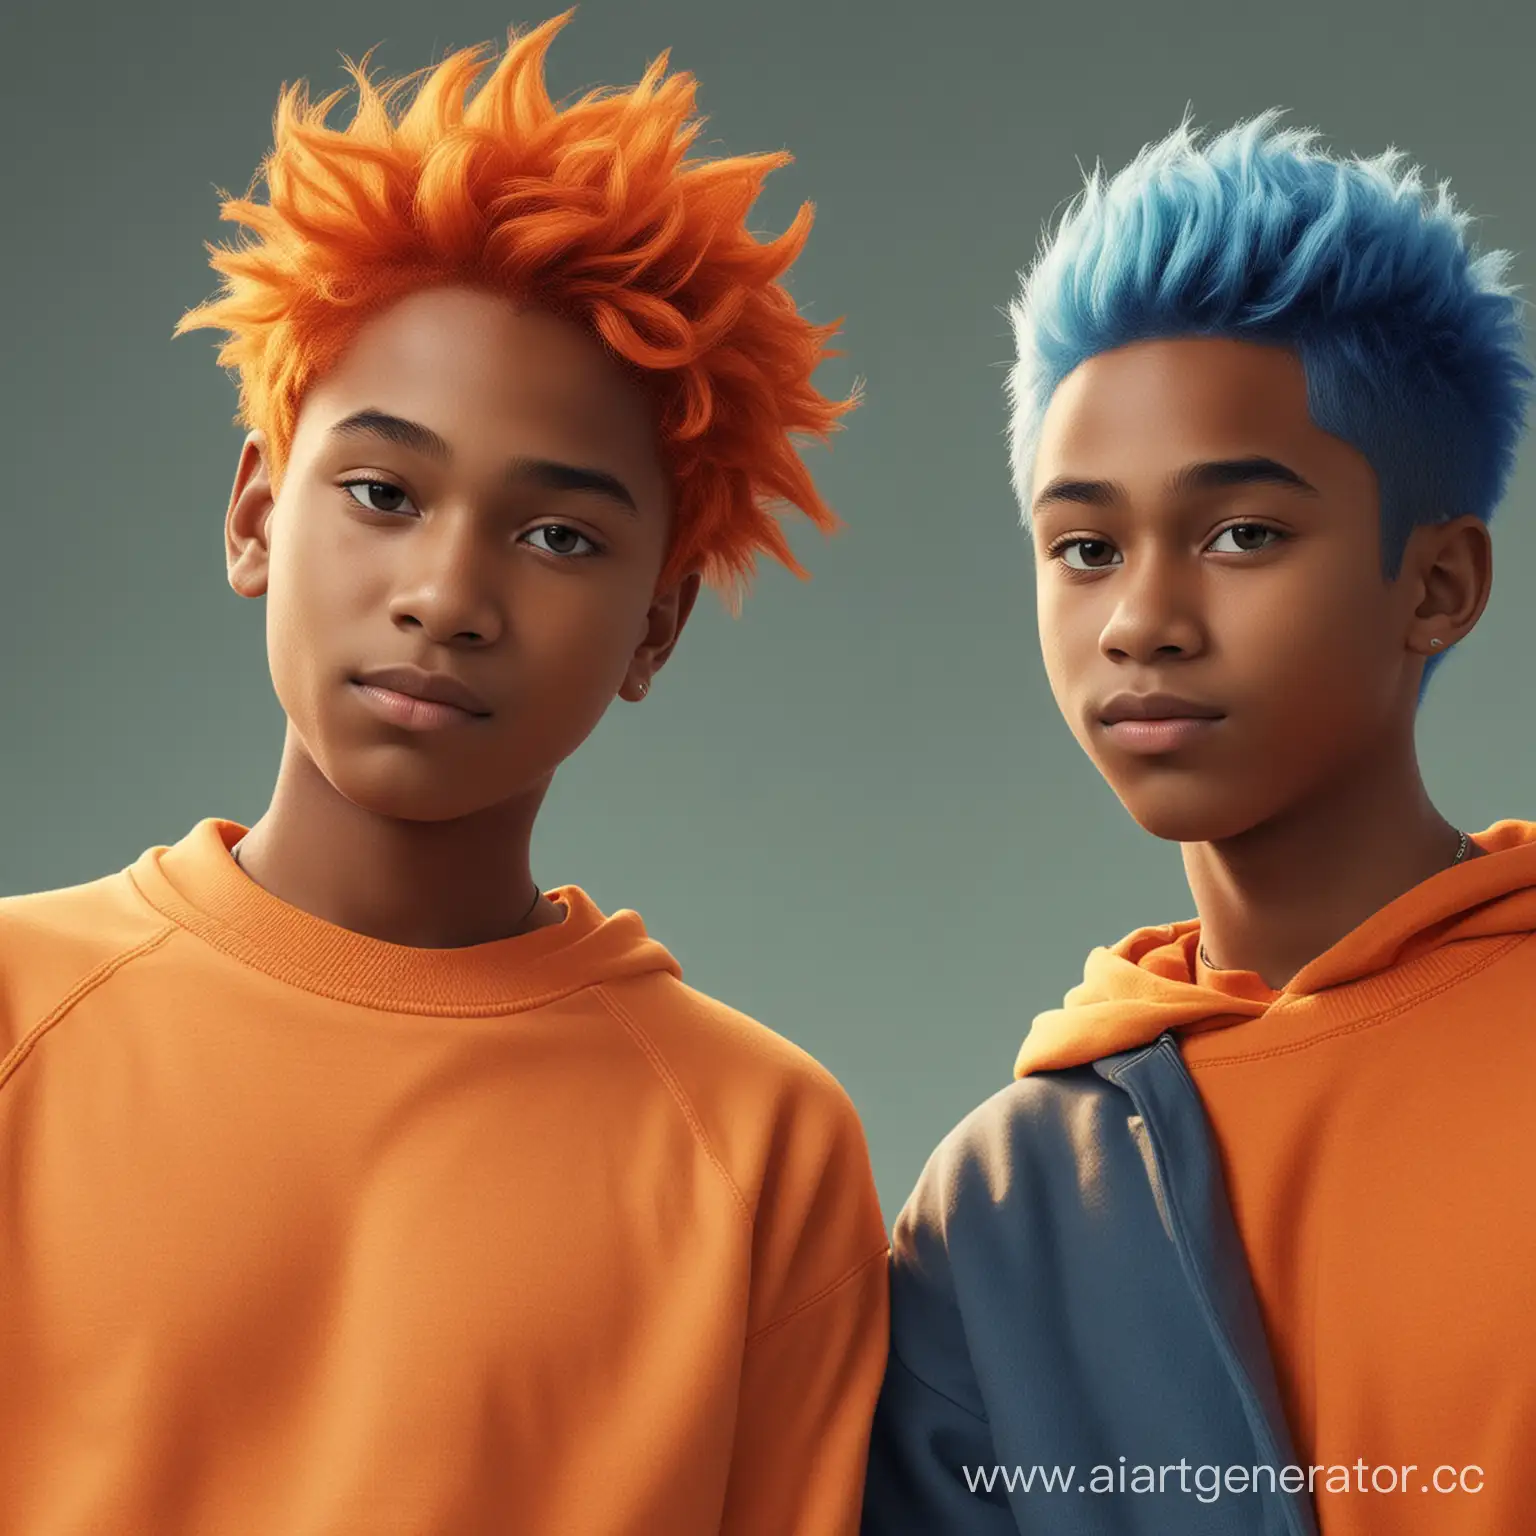 Dynamic-Duo-RedHaired-Boy-in-Orange-Sweatshirt-and-BlueHaired-Boy